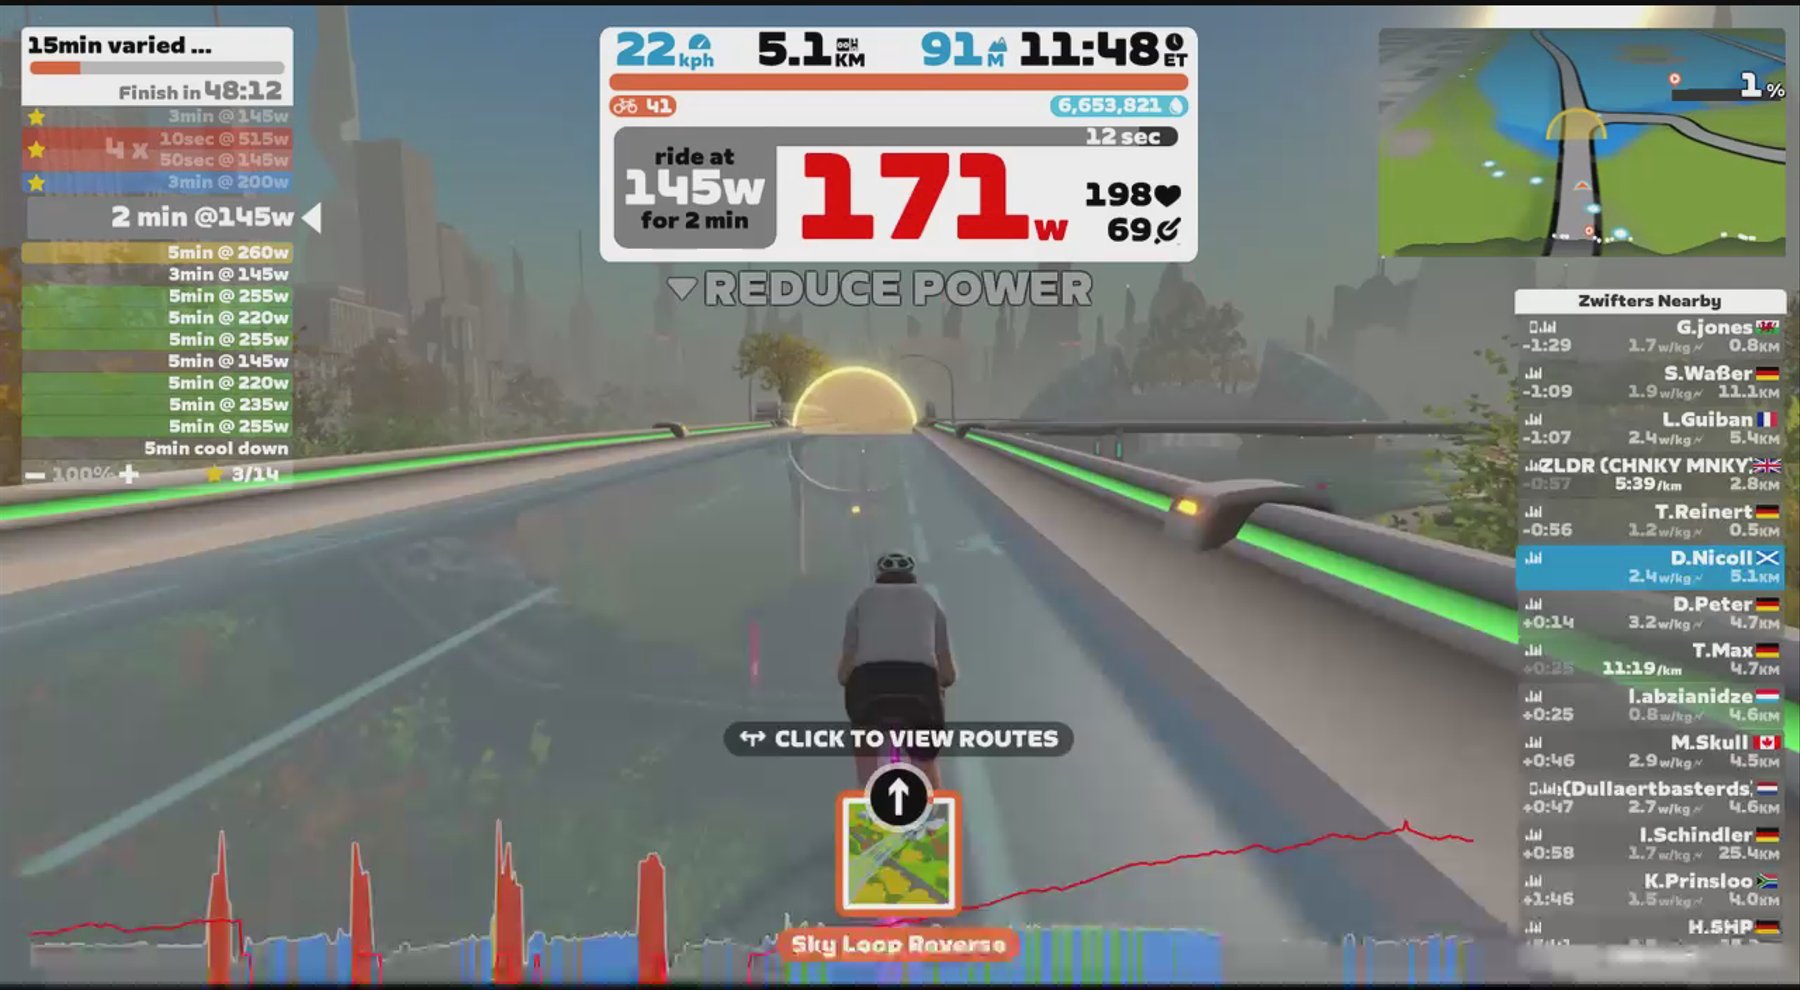 Zwift - 15min varied tempo #2 in New York